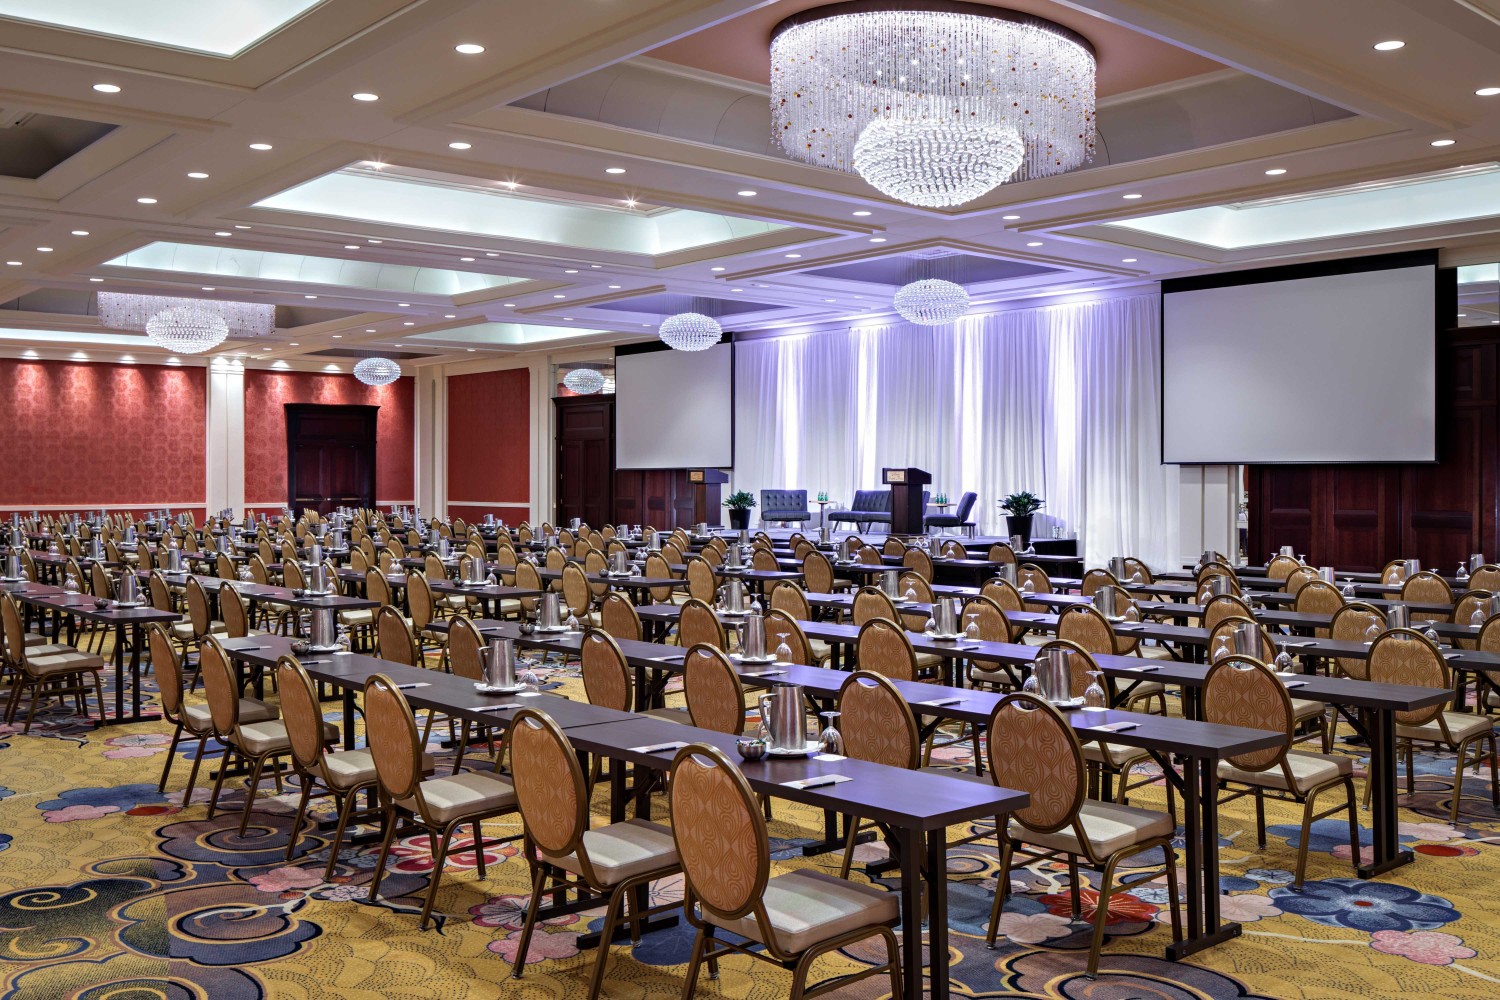 Amway Grand_Ambassador Ballroom_Ballroom_Meeting Room_Event Space_Set Up_Rows of Tables_Chairs_Projector Screens_Chandeliers_Notepads_Pens_Stage_Podium